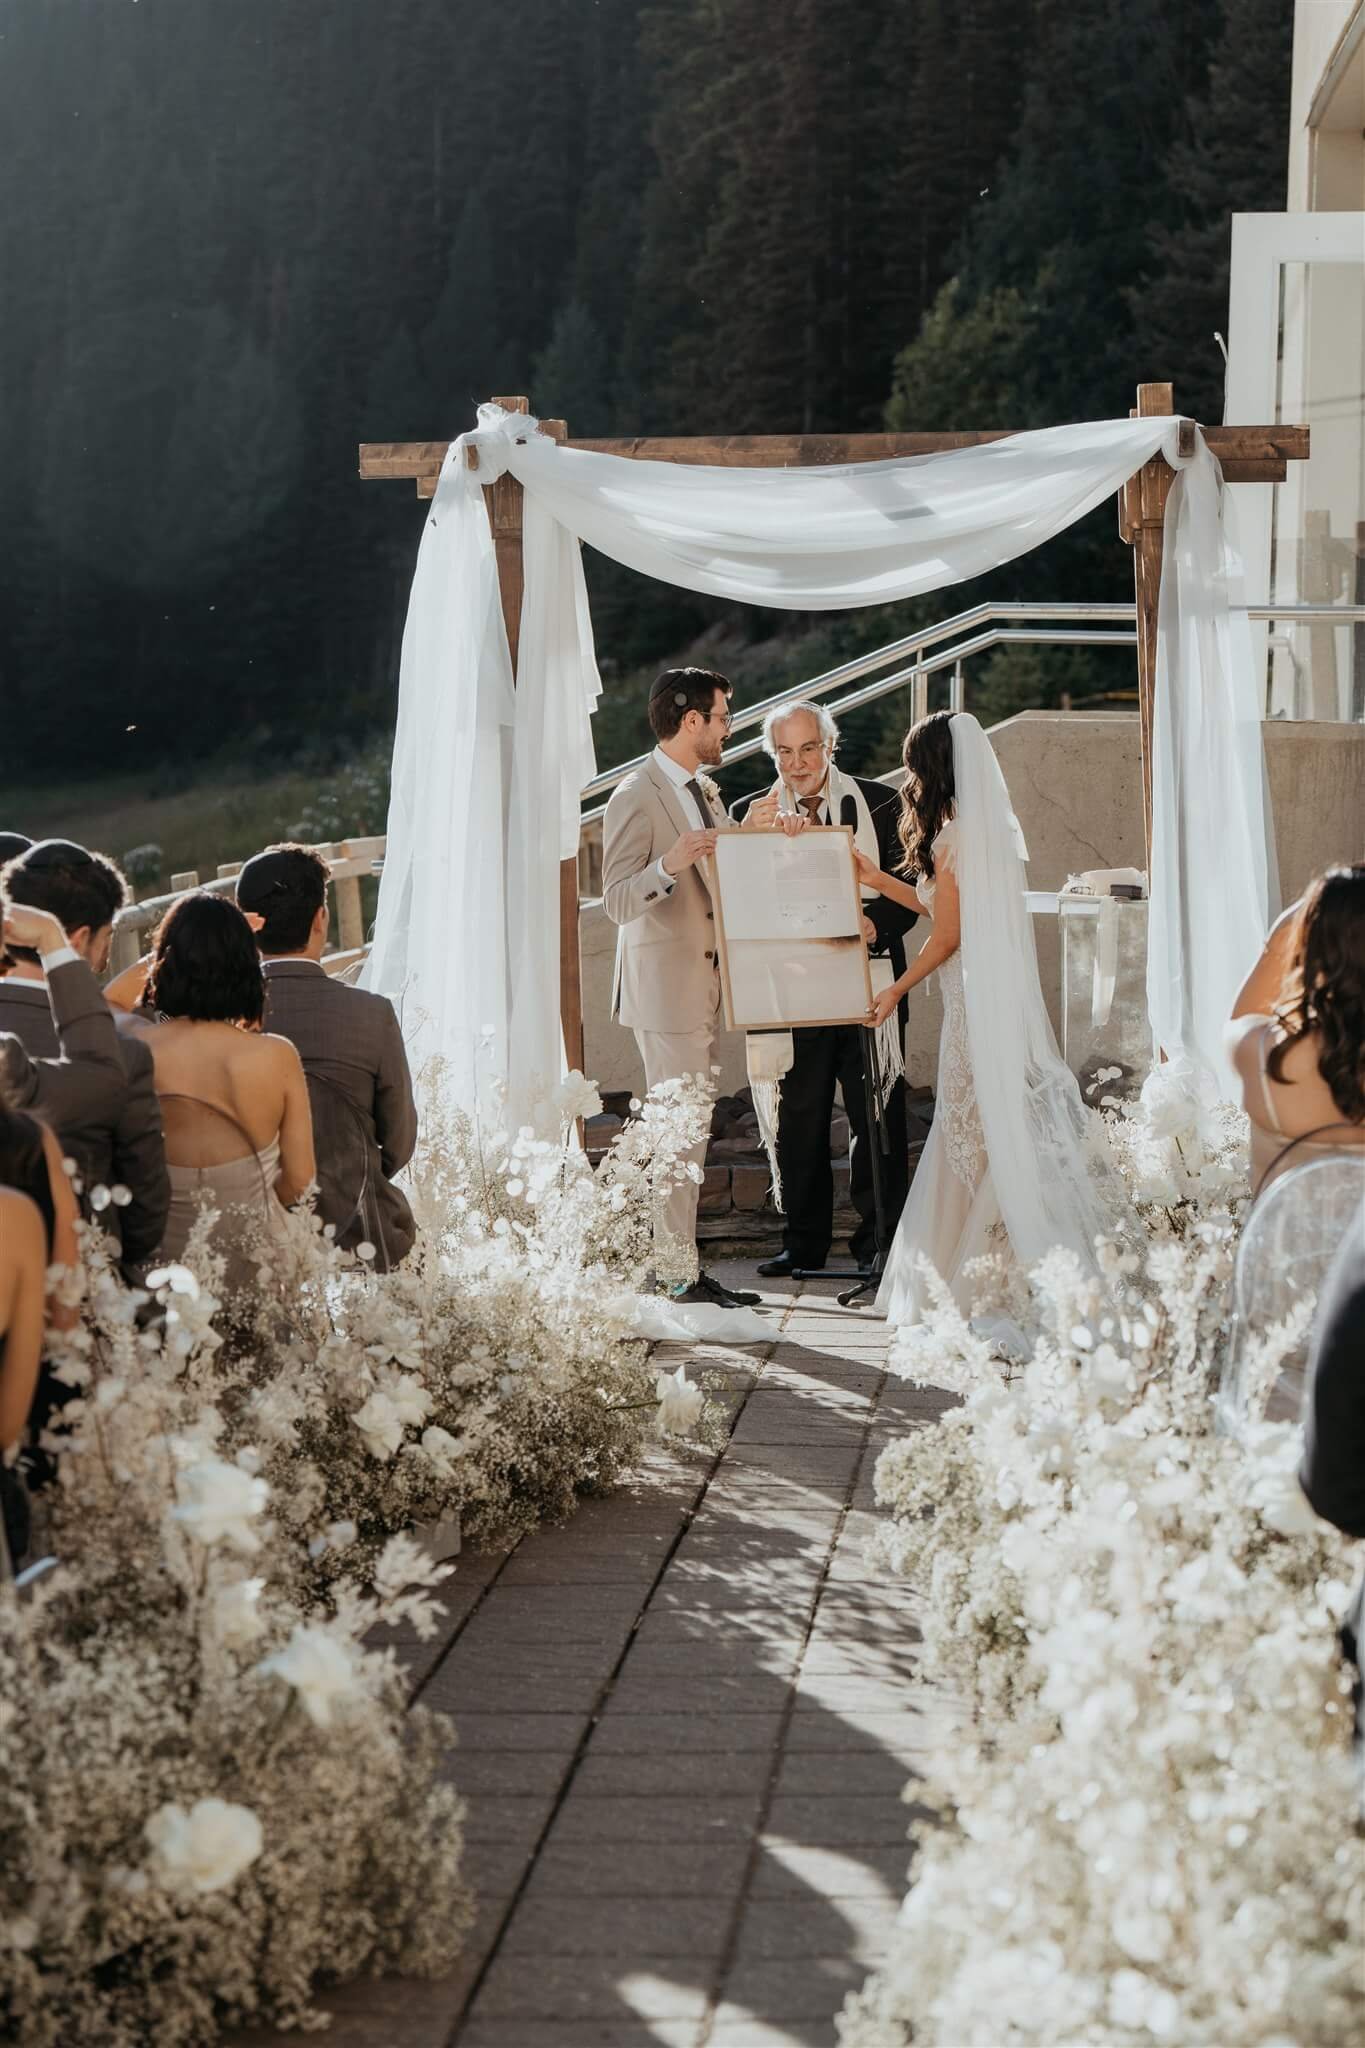 Ketubah reading at outdoor wedding ceremony at Lake Louise